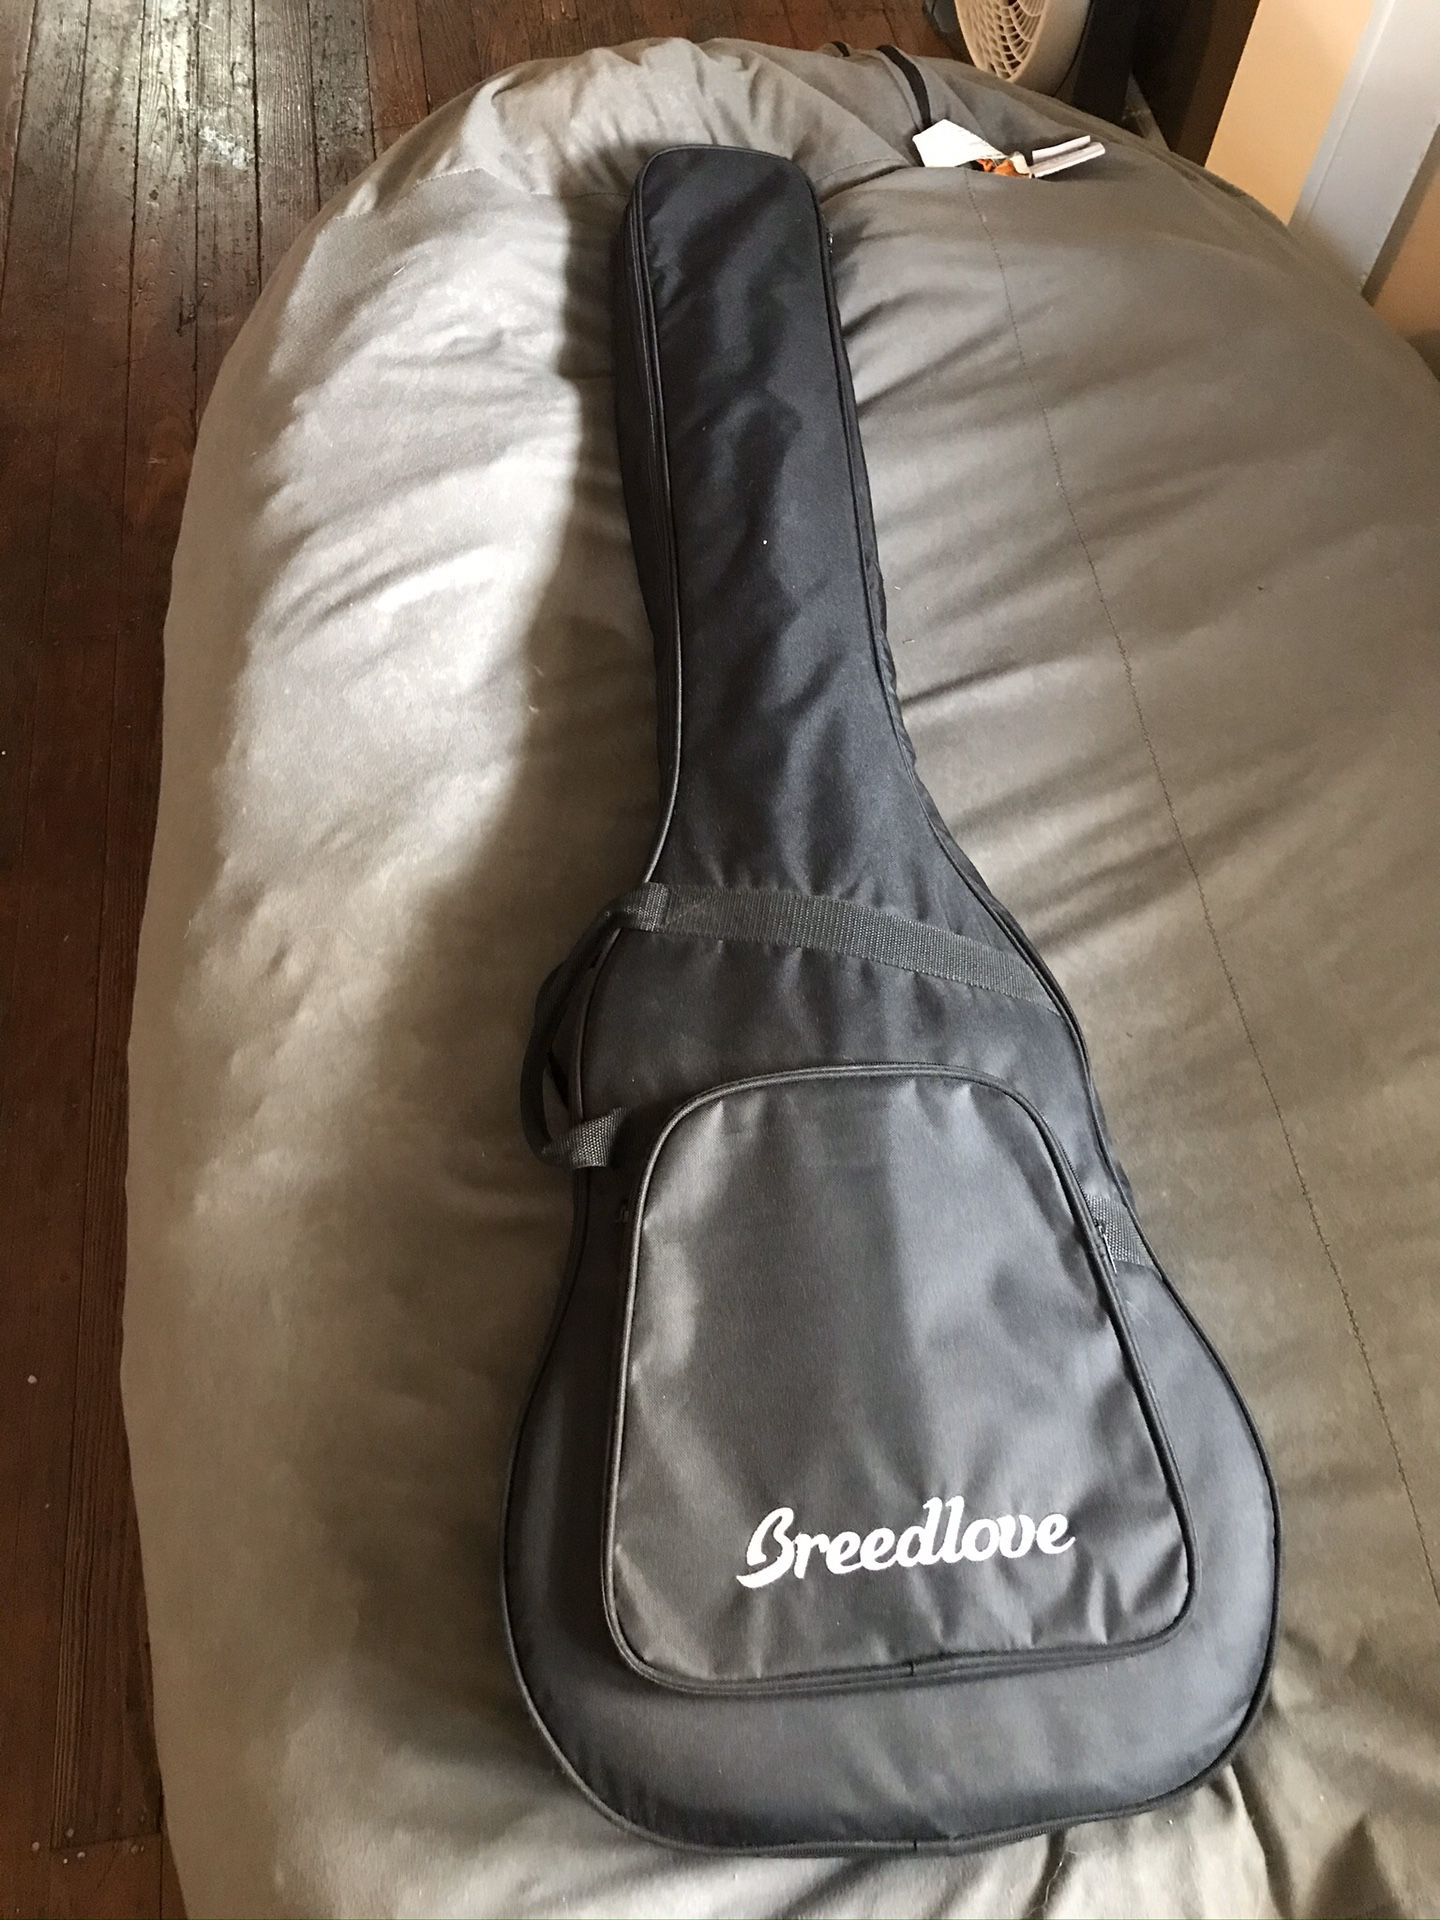 Breedlove acoustic/electric bass guitar